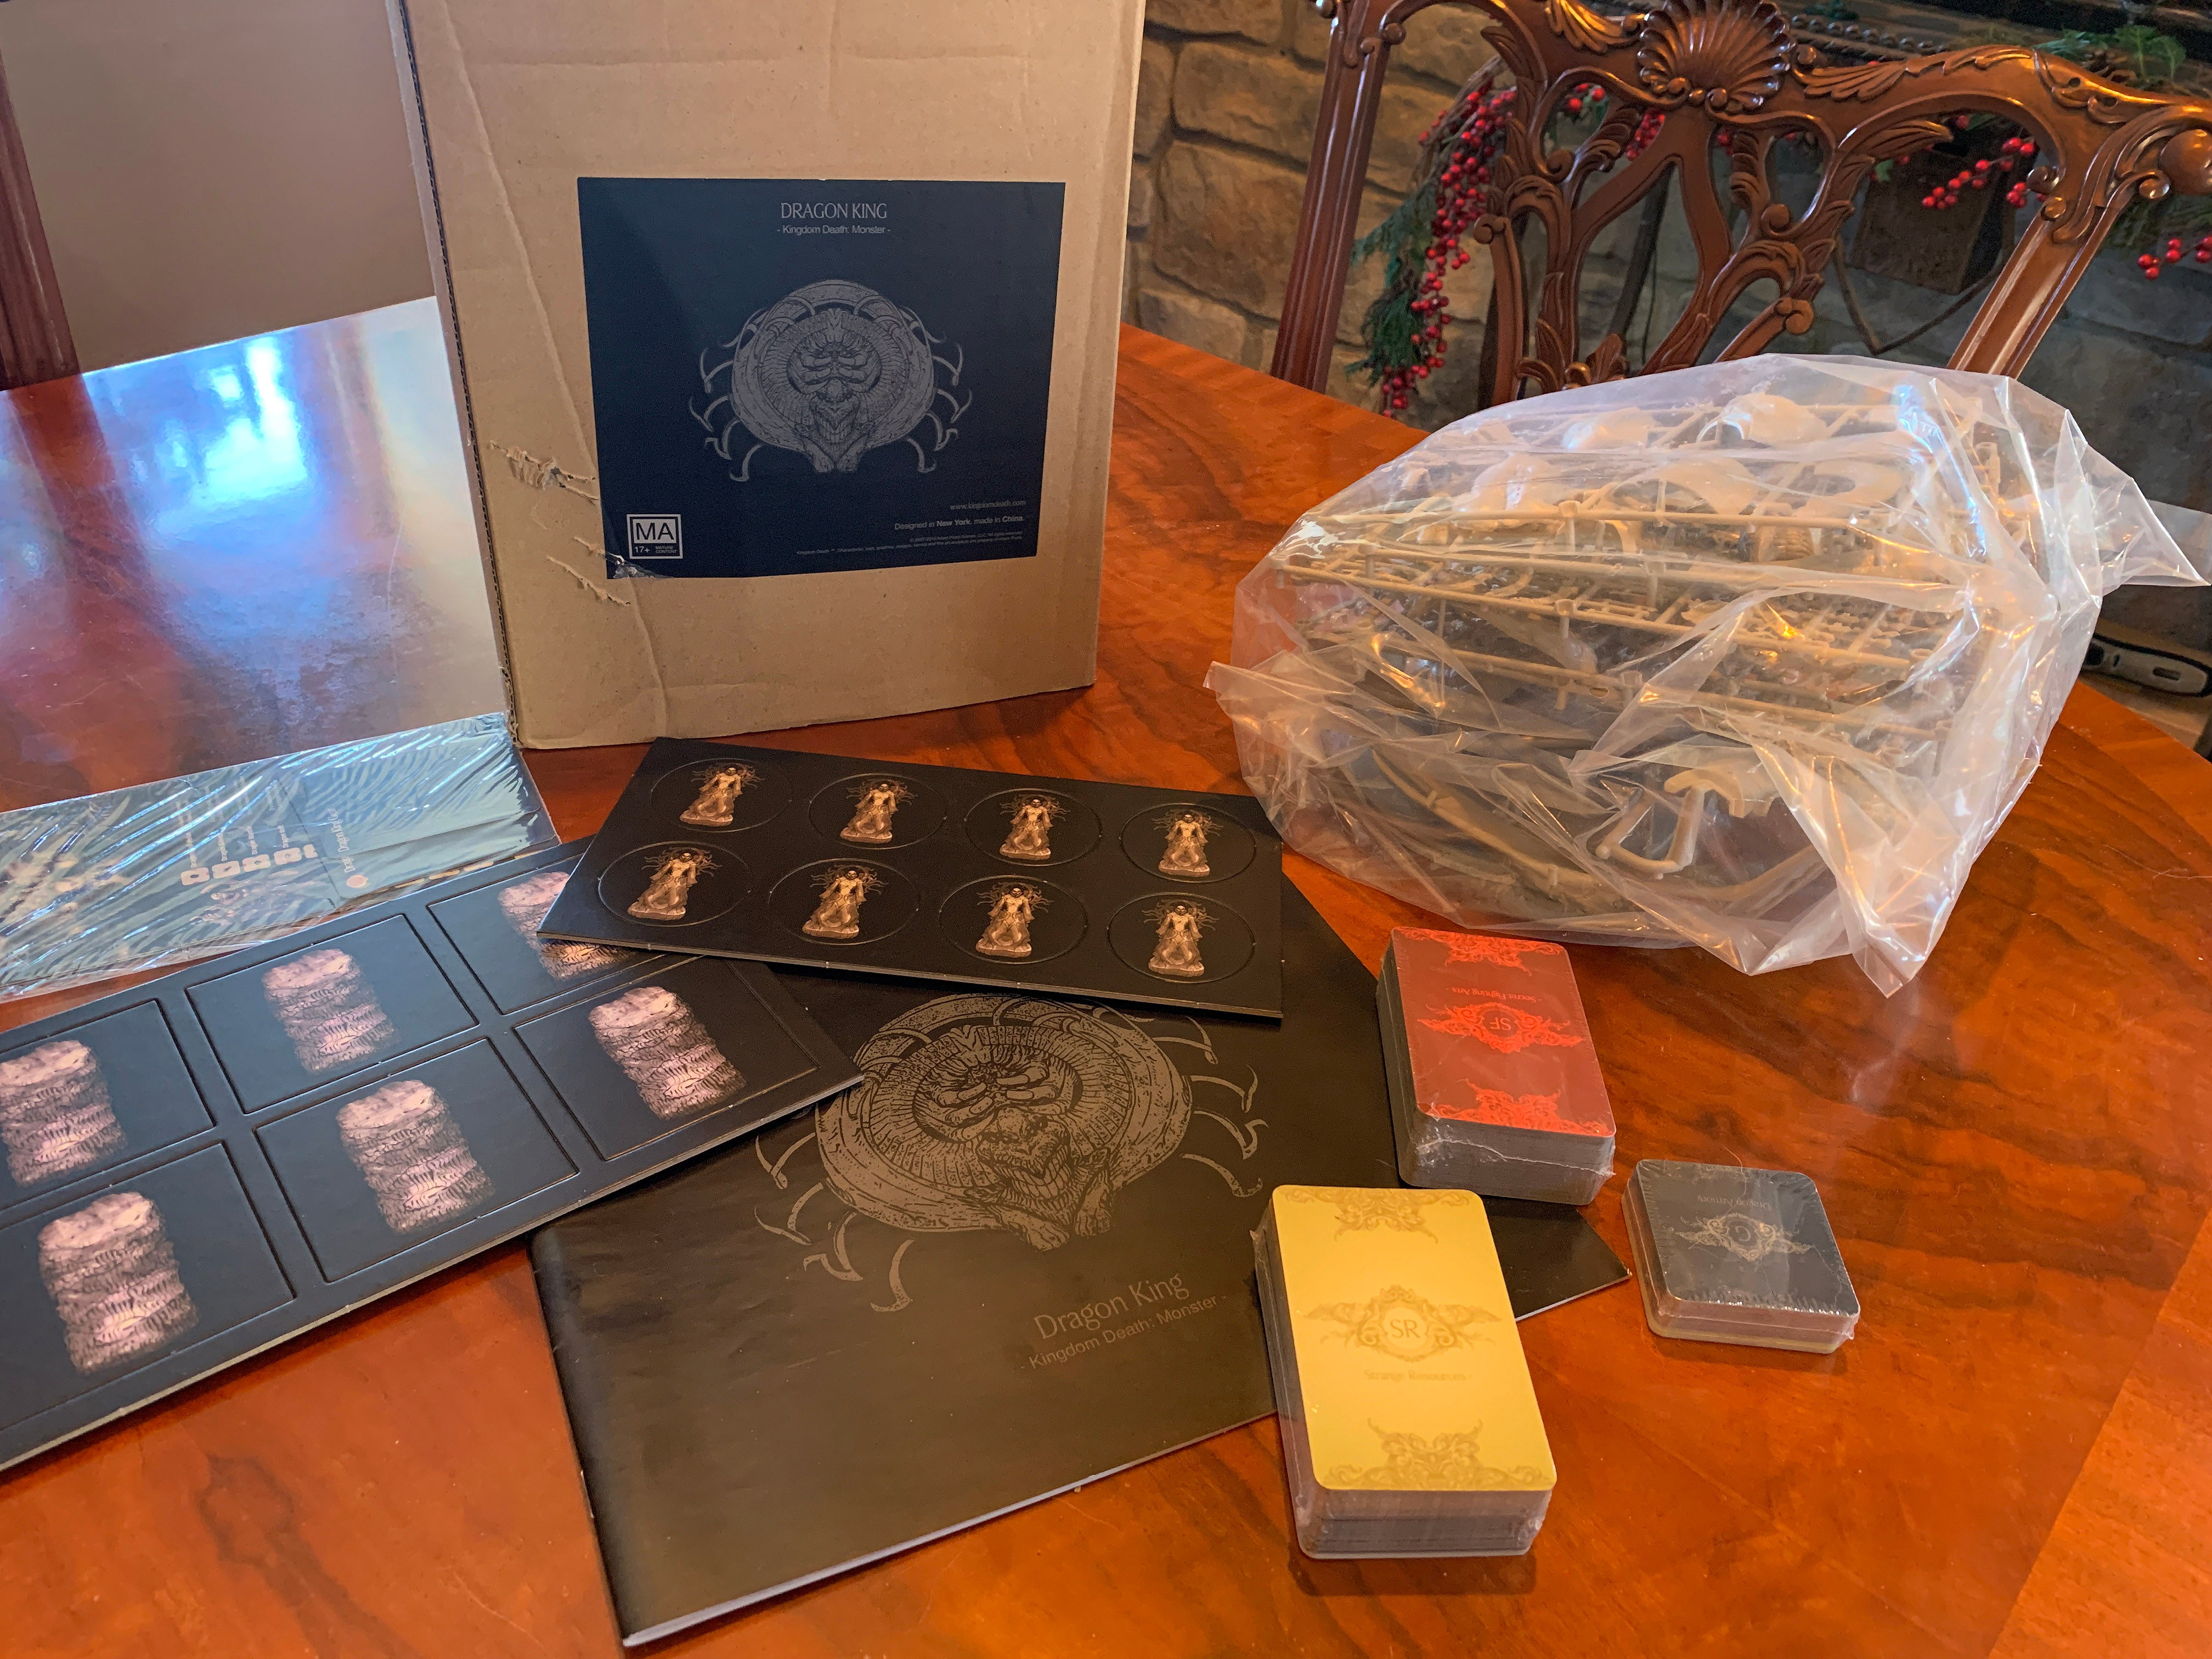 Kingdom Death Monster, Dragon King Expansion, In Box, Core Version, 2015